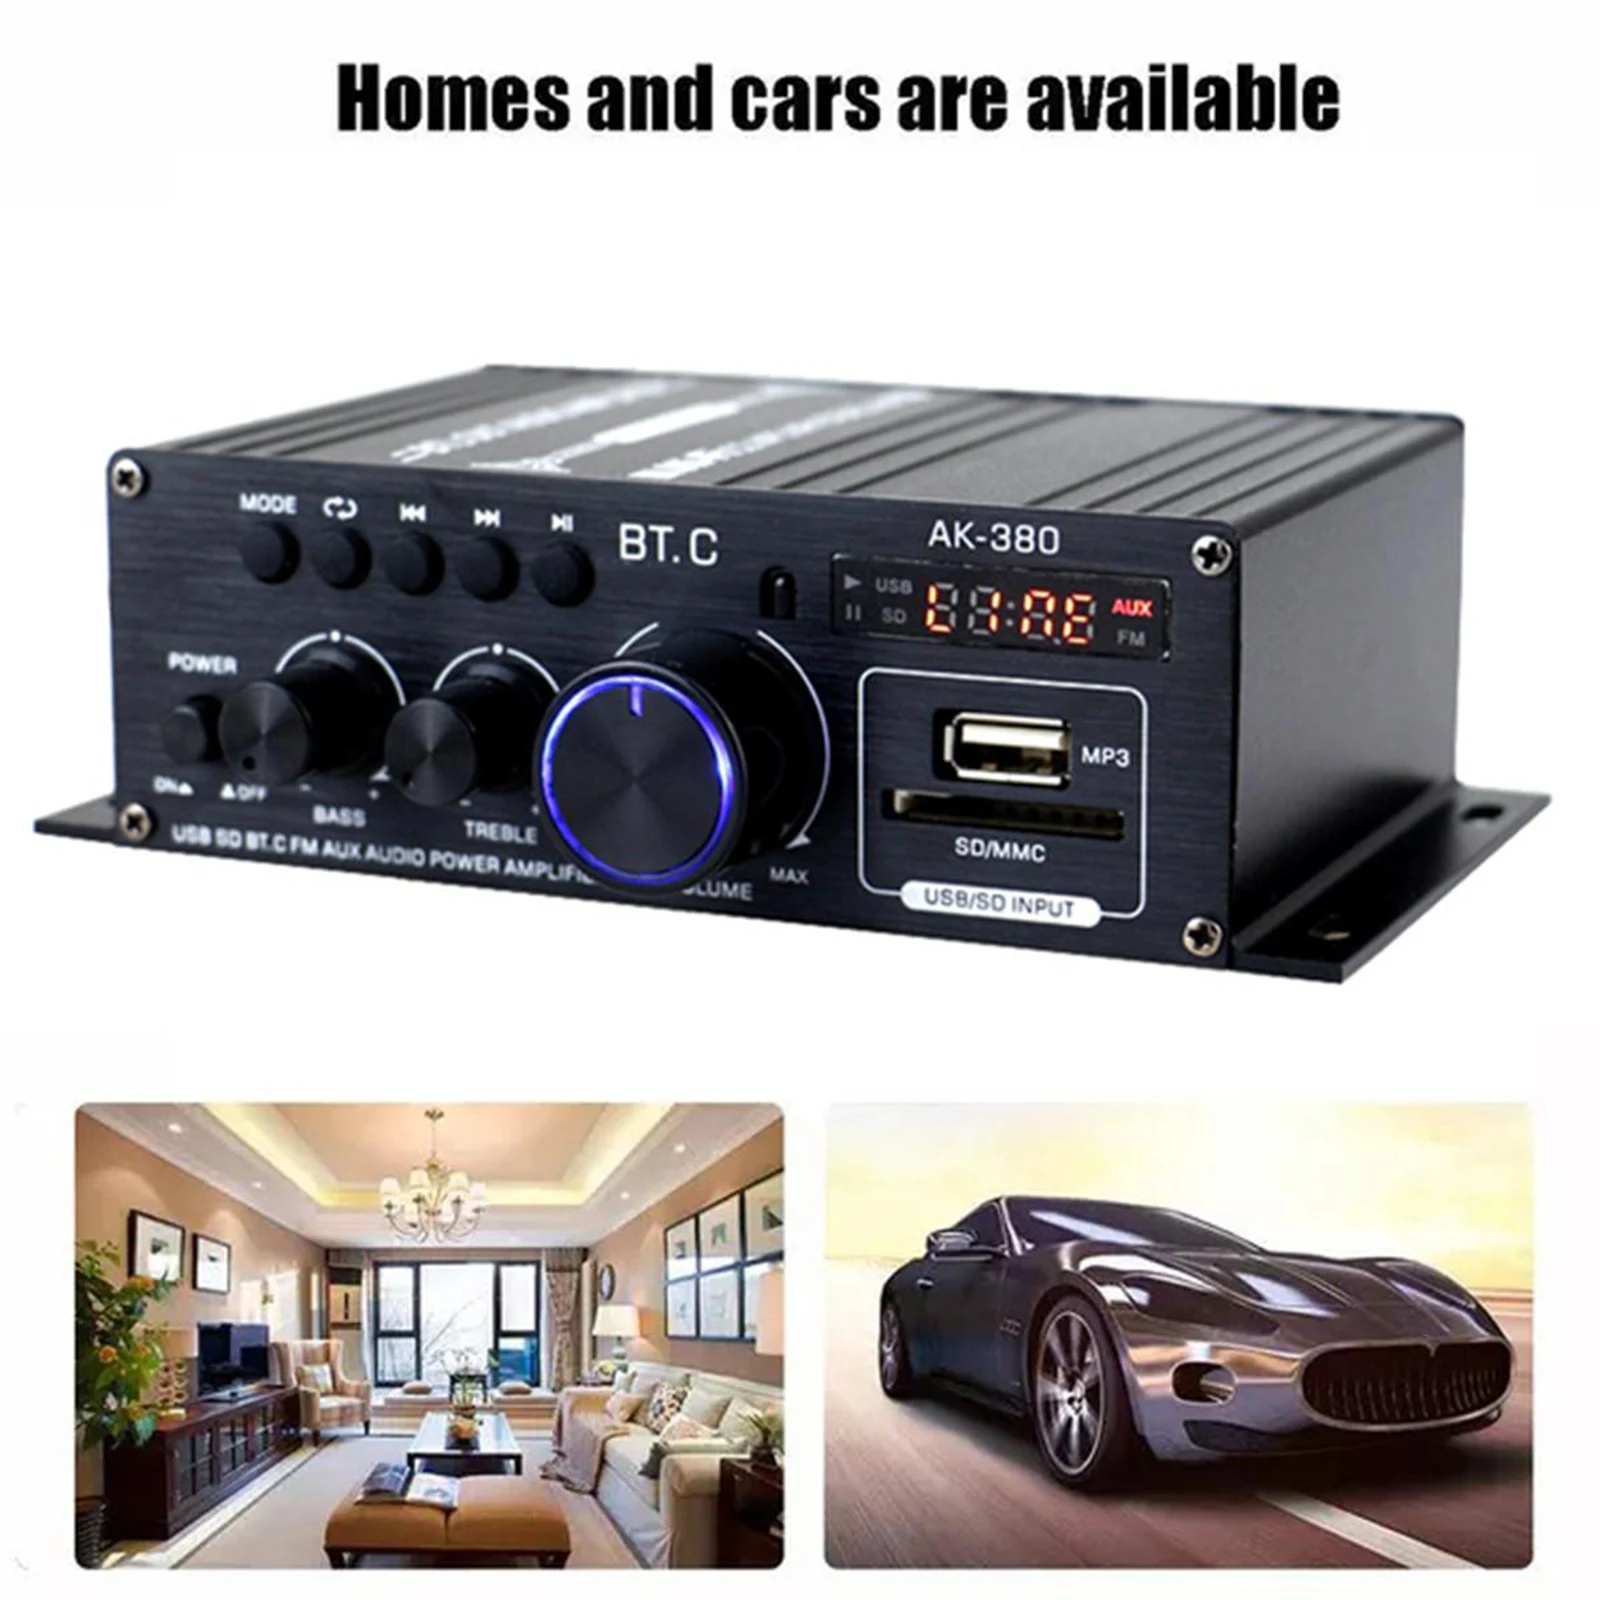 AK380 400W + 400W Audio Power Amplifier 2-Channel for Car Theater PA System